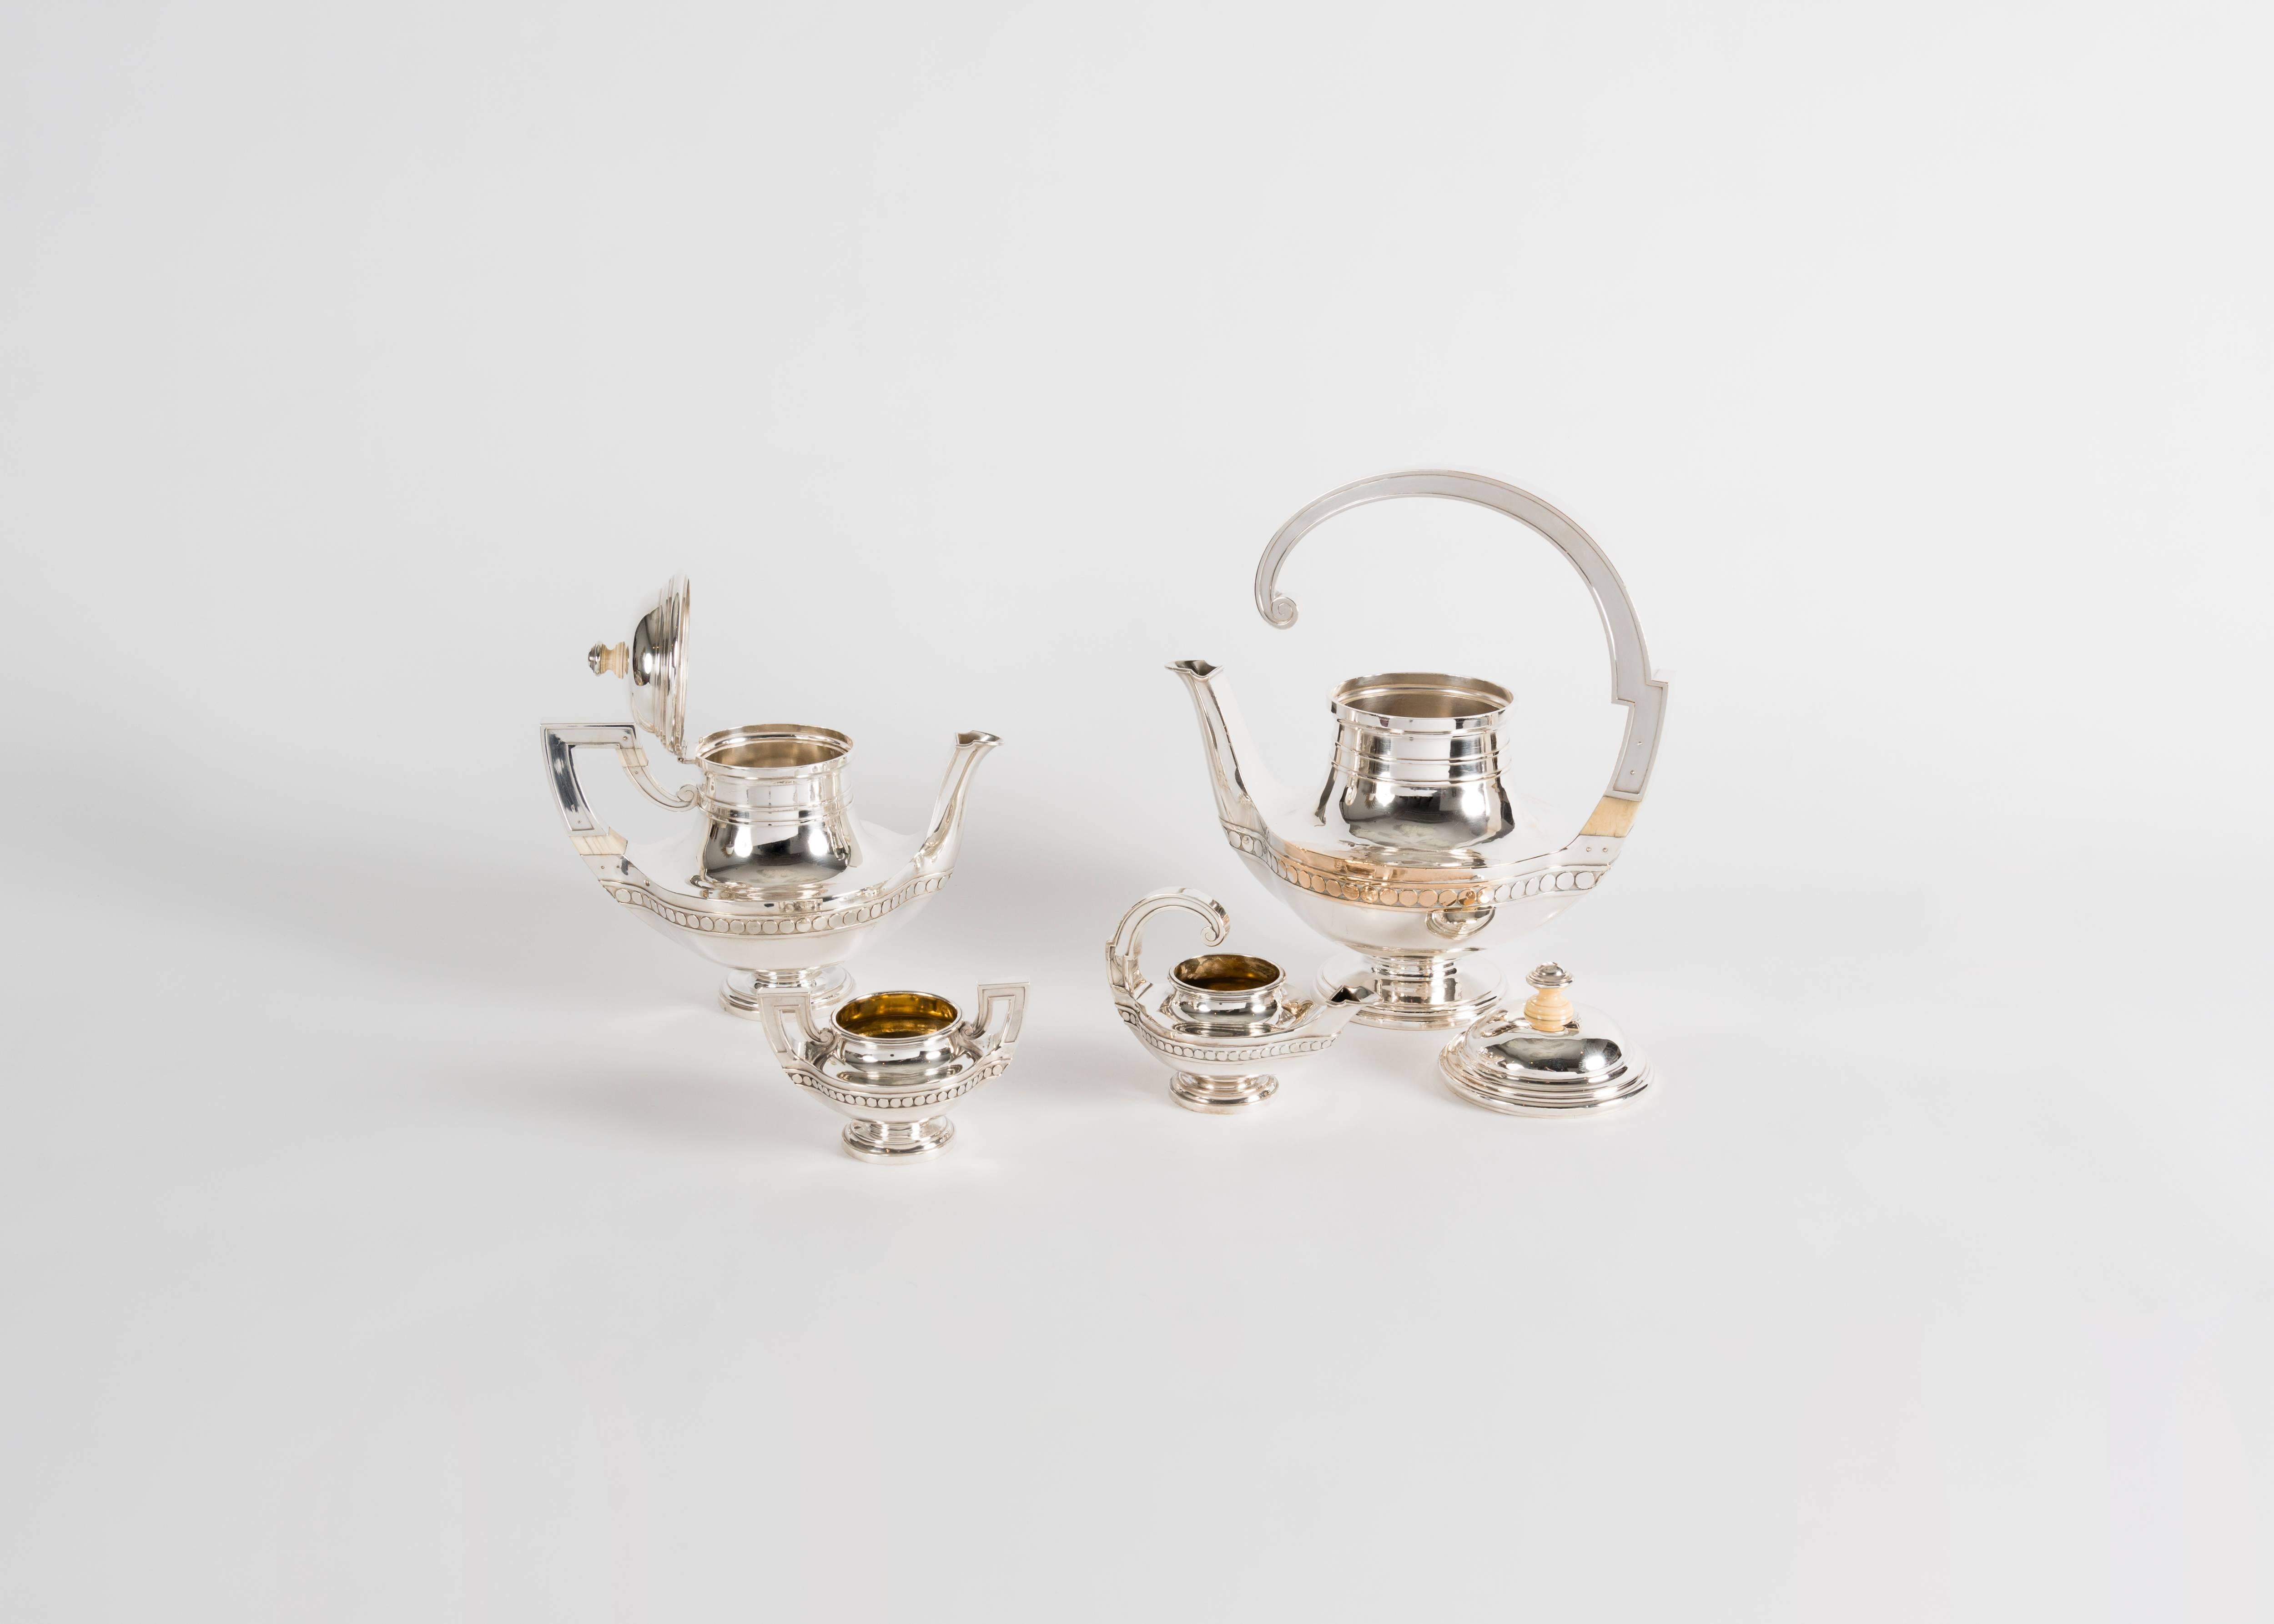 A silver tea set including two tea pots, a creamer, and a sugar bowl, with elegantly arched handles by renowned French silversmith Gustave Keller.